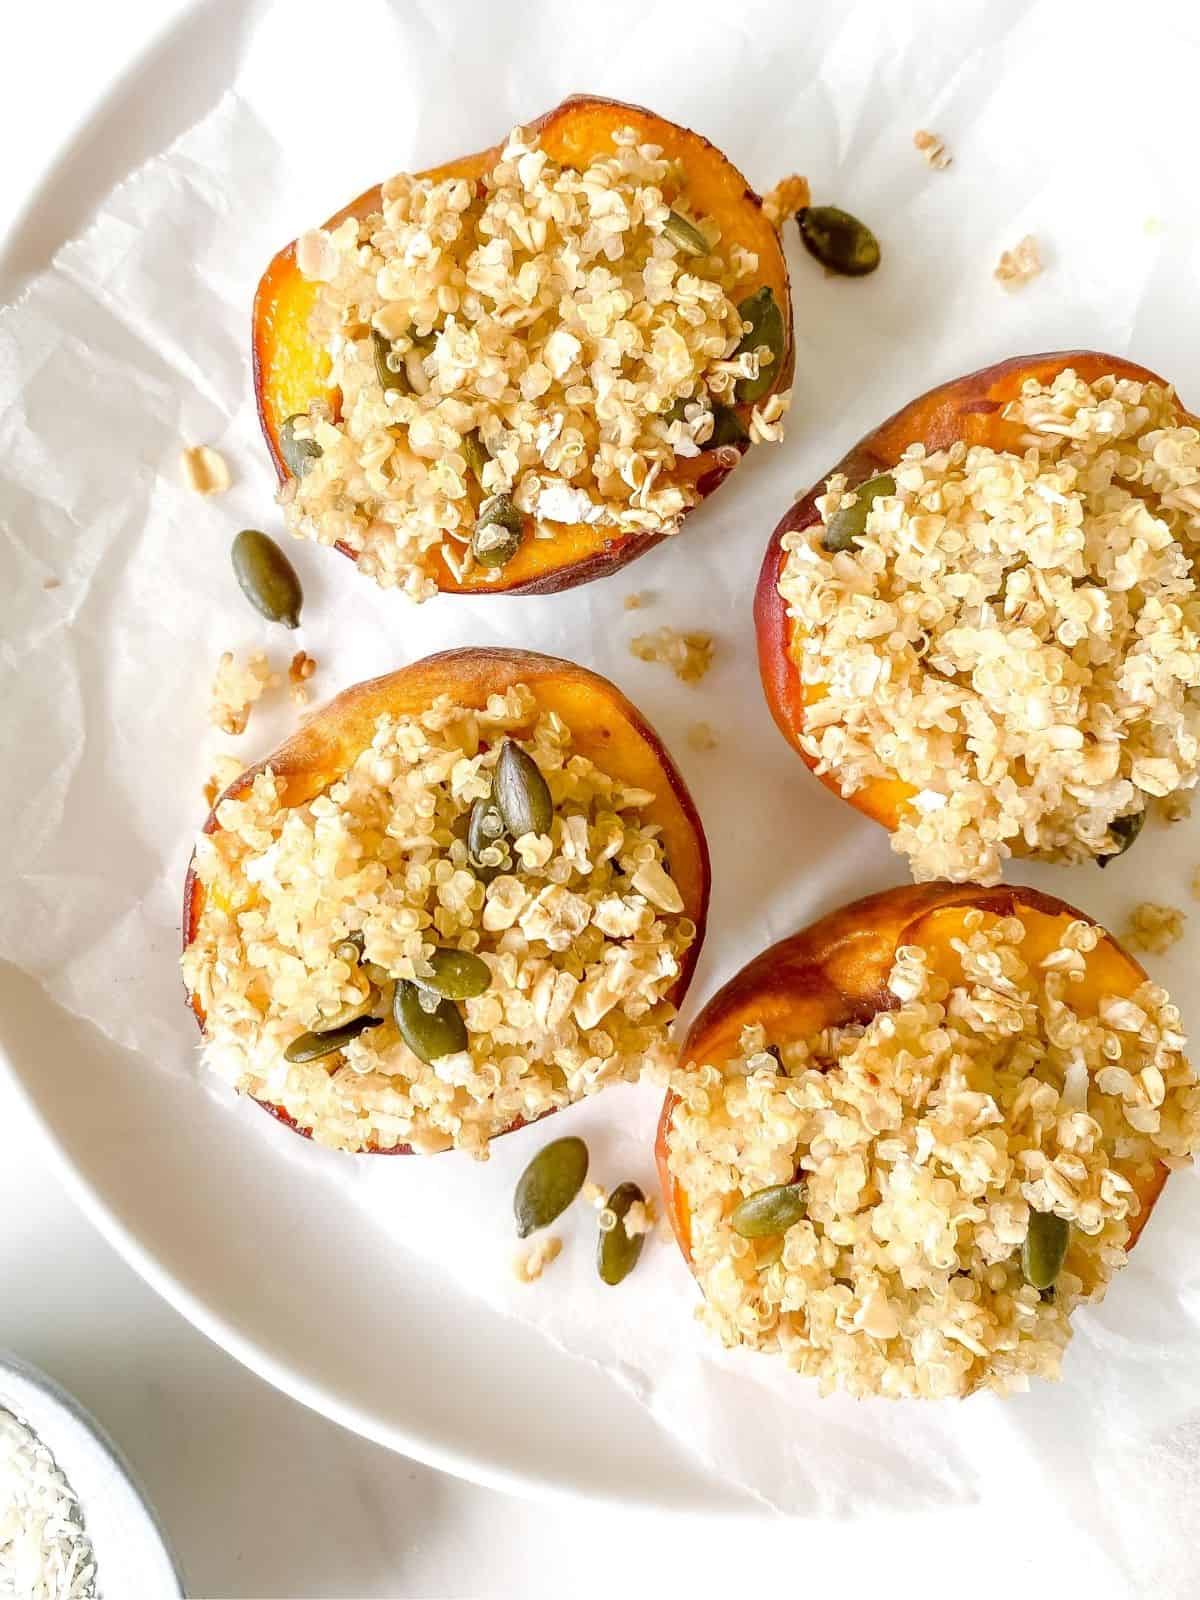 four baked peaches with a crumble topping on a white plate.